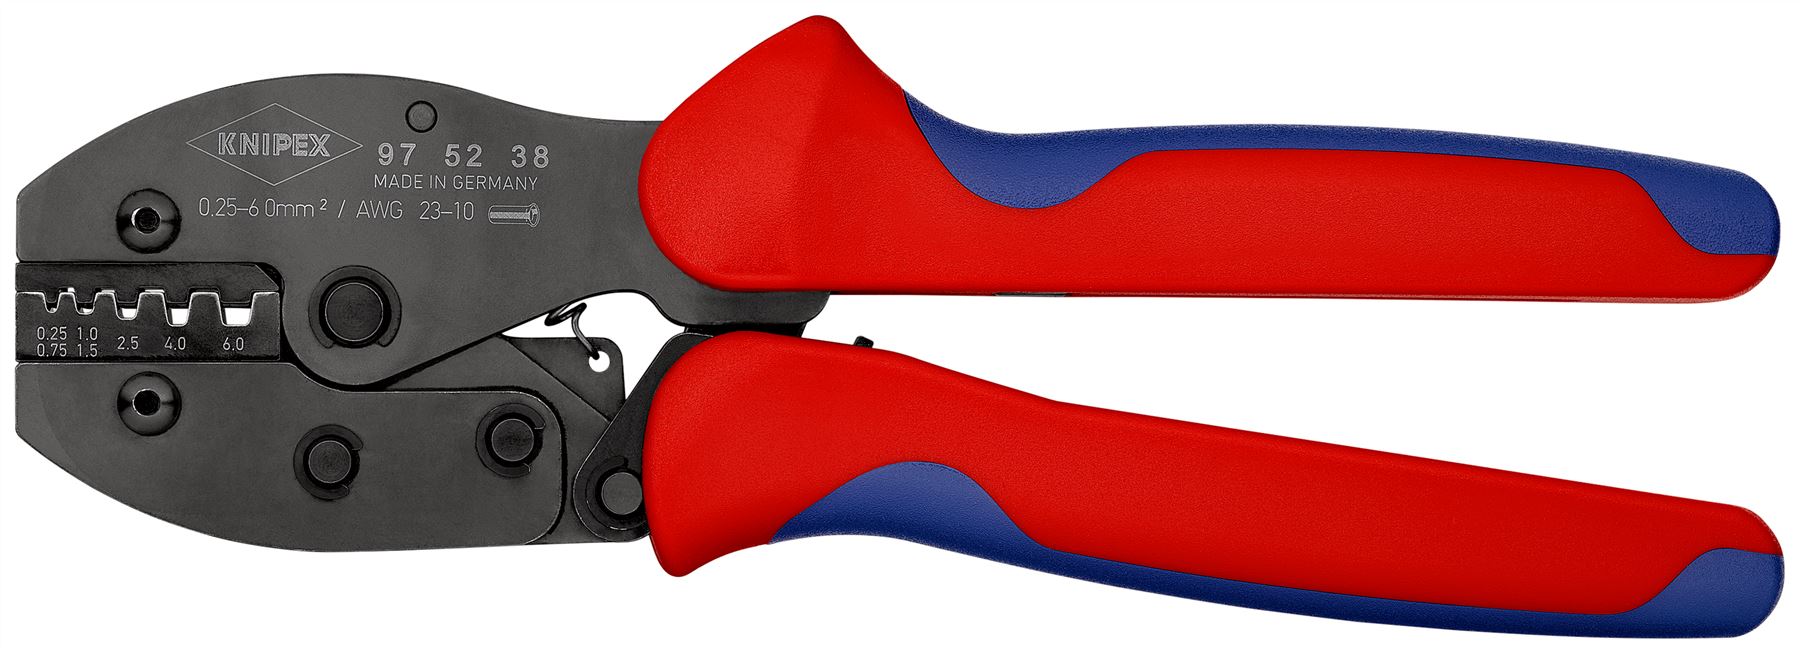 KNIPEX PreciForce Crimping Pliers for Insulated and Non Insulated Wire Ferrules 0.25-6.0mm² 220mm 97 52 38